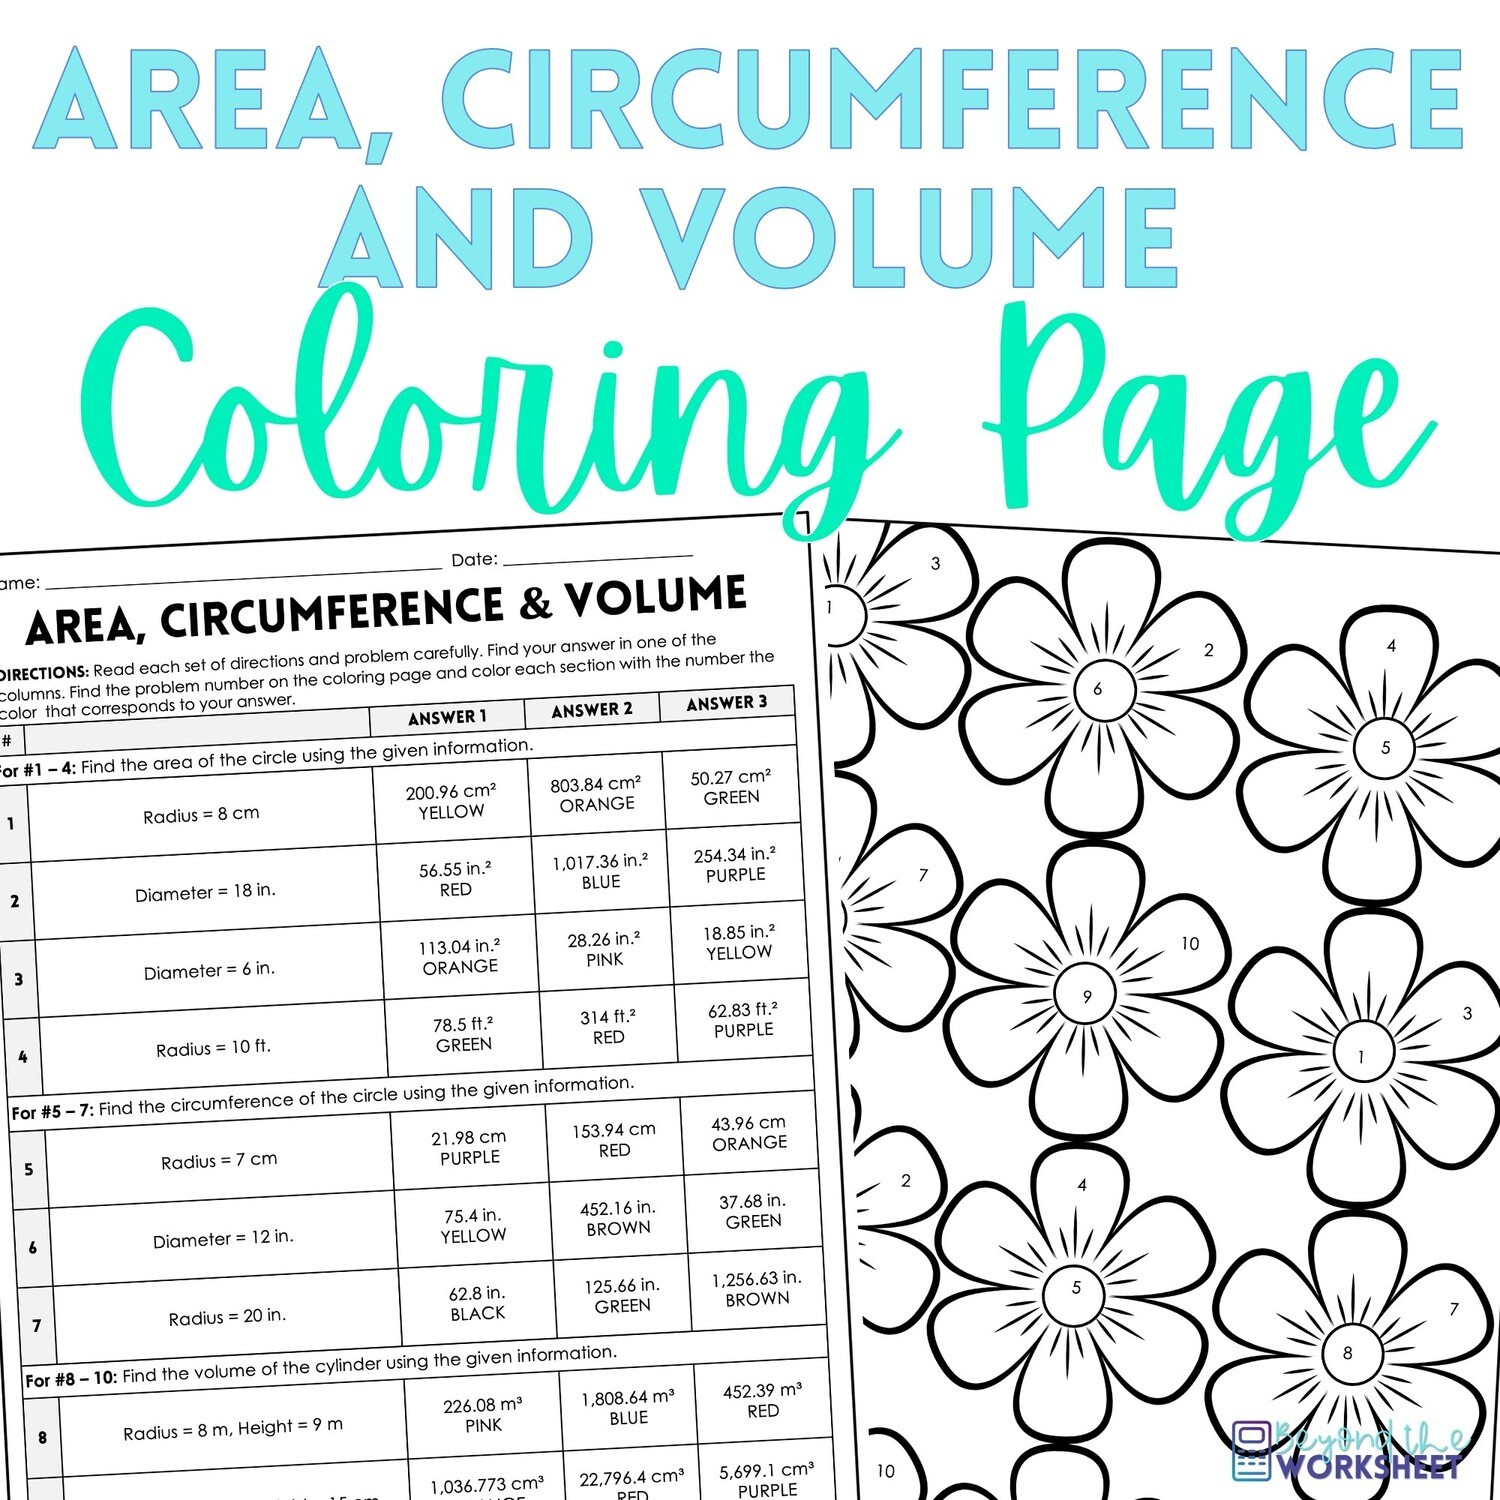 Area, Circumference and Volume Coloring Worksheet